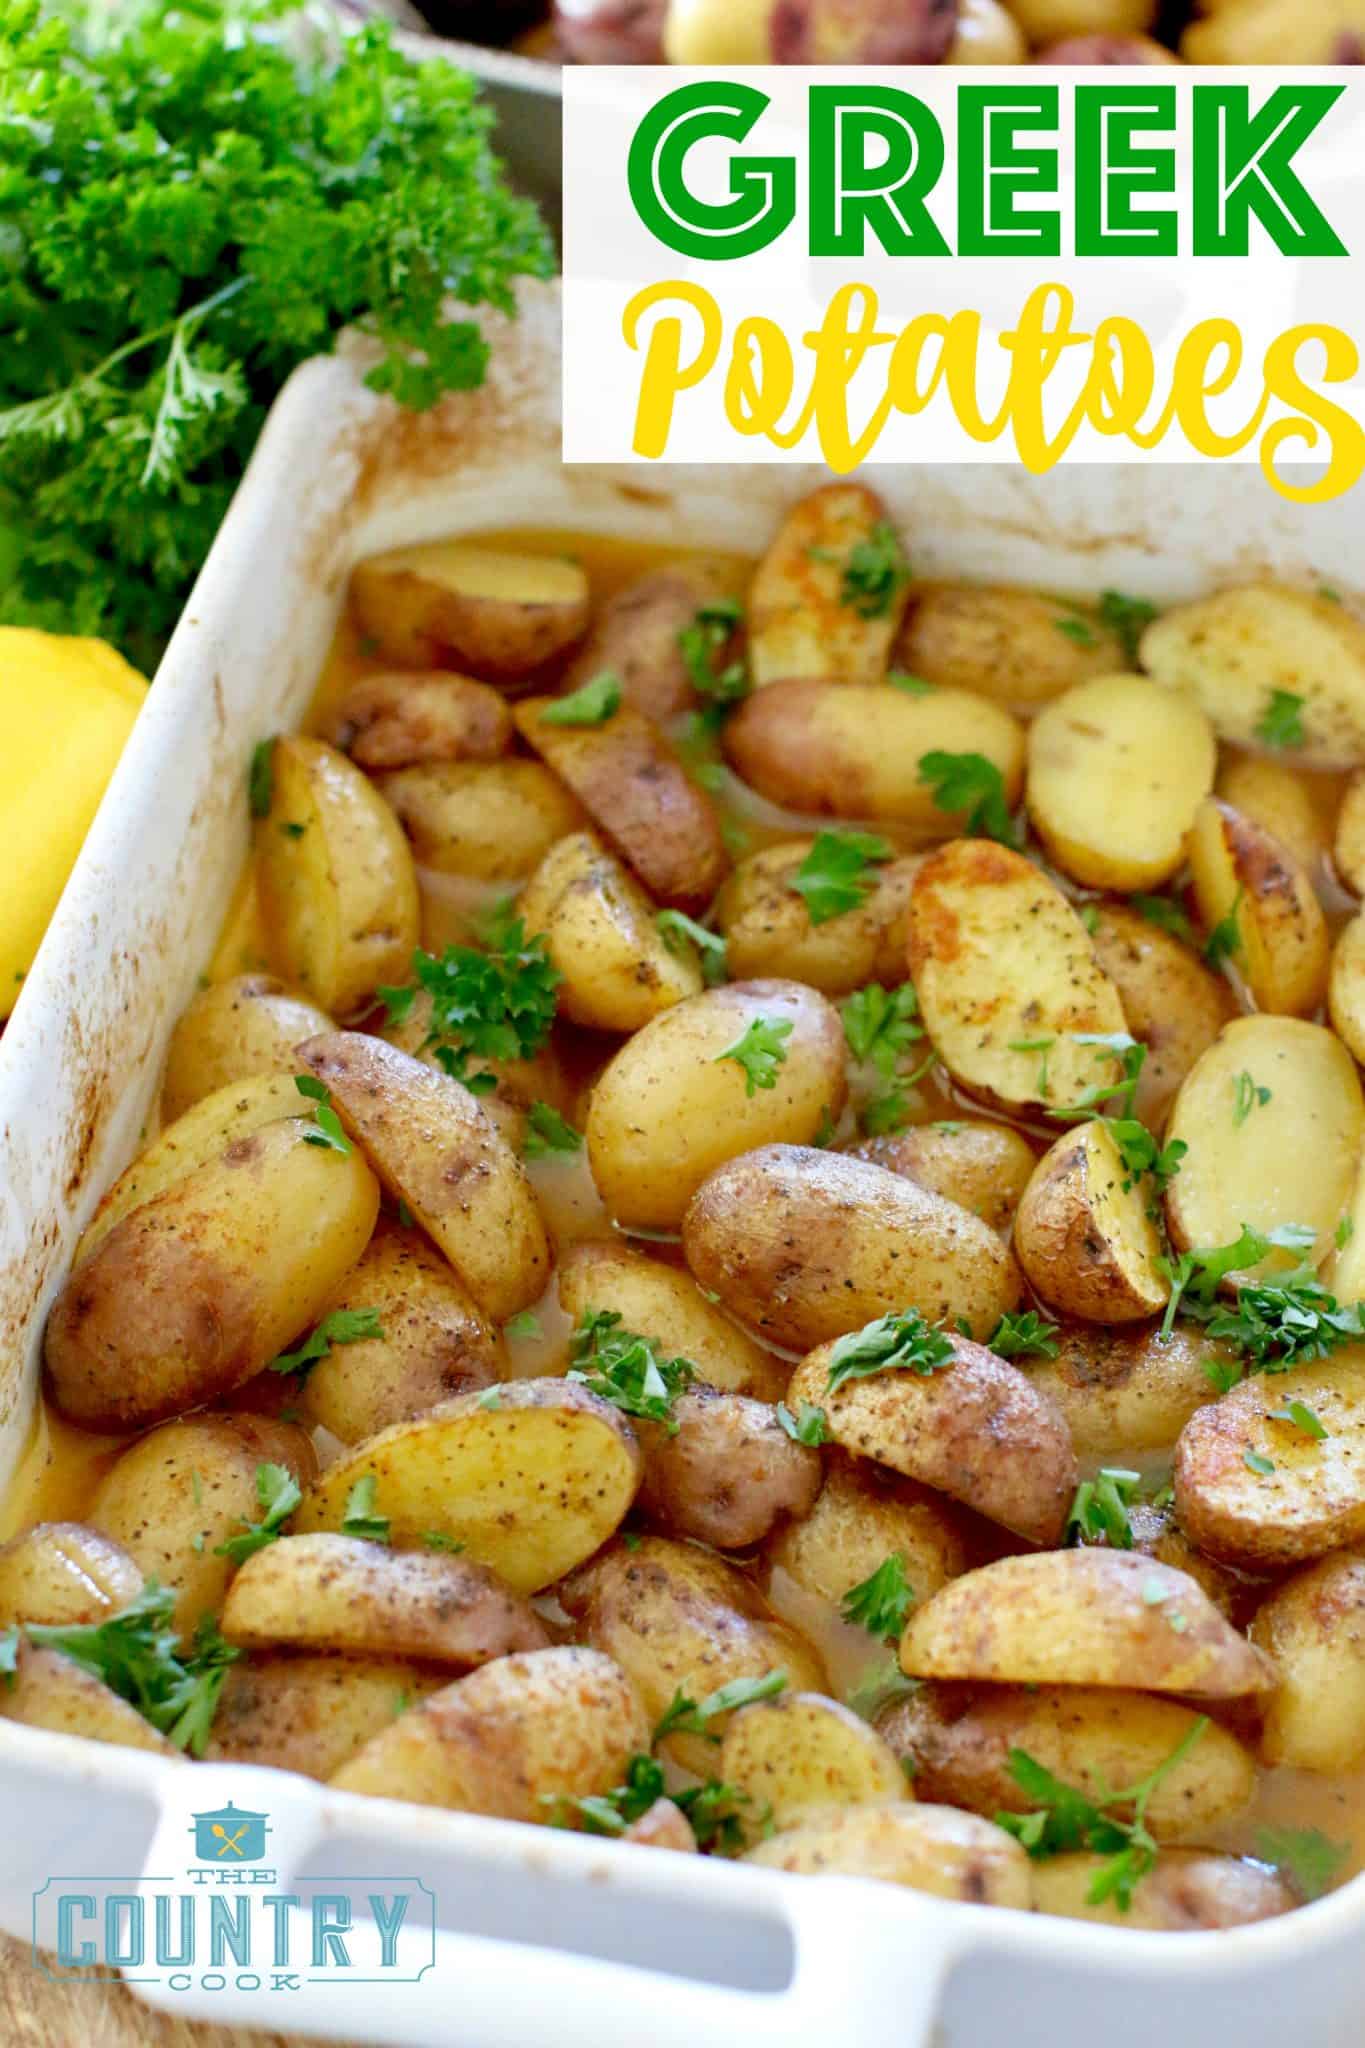 Greek Potatoes recipe from The Country Cook shown in a small white rectangular baking dish with fresh parsley on the side.